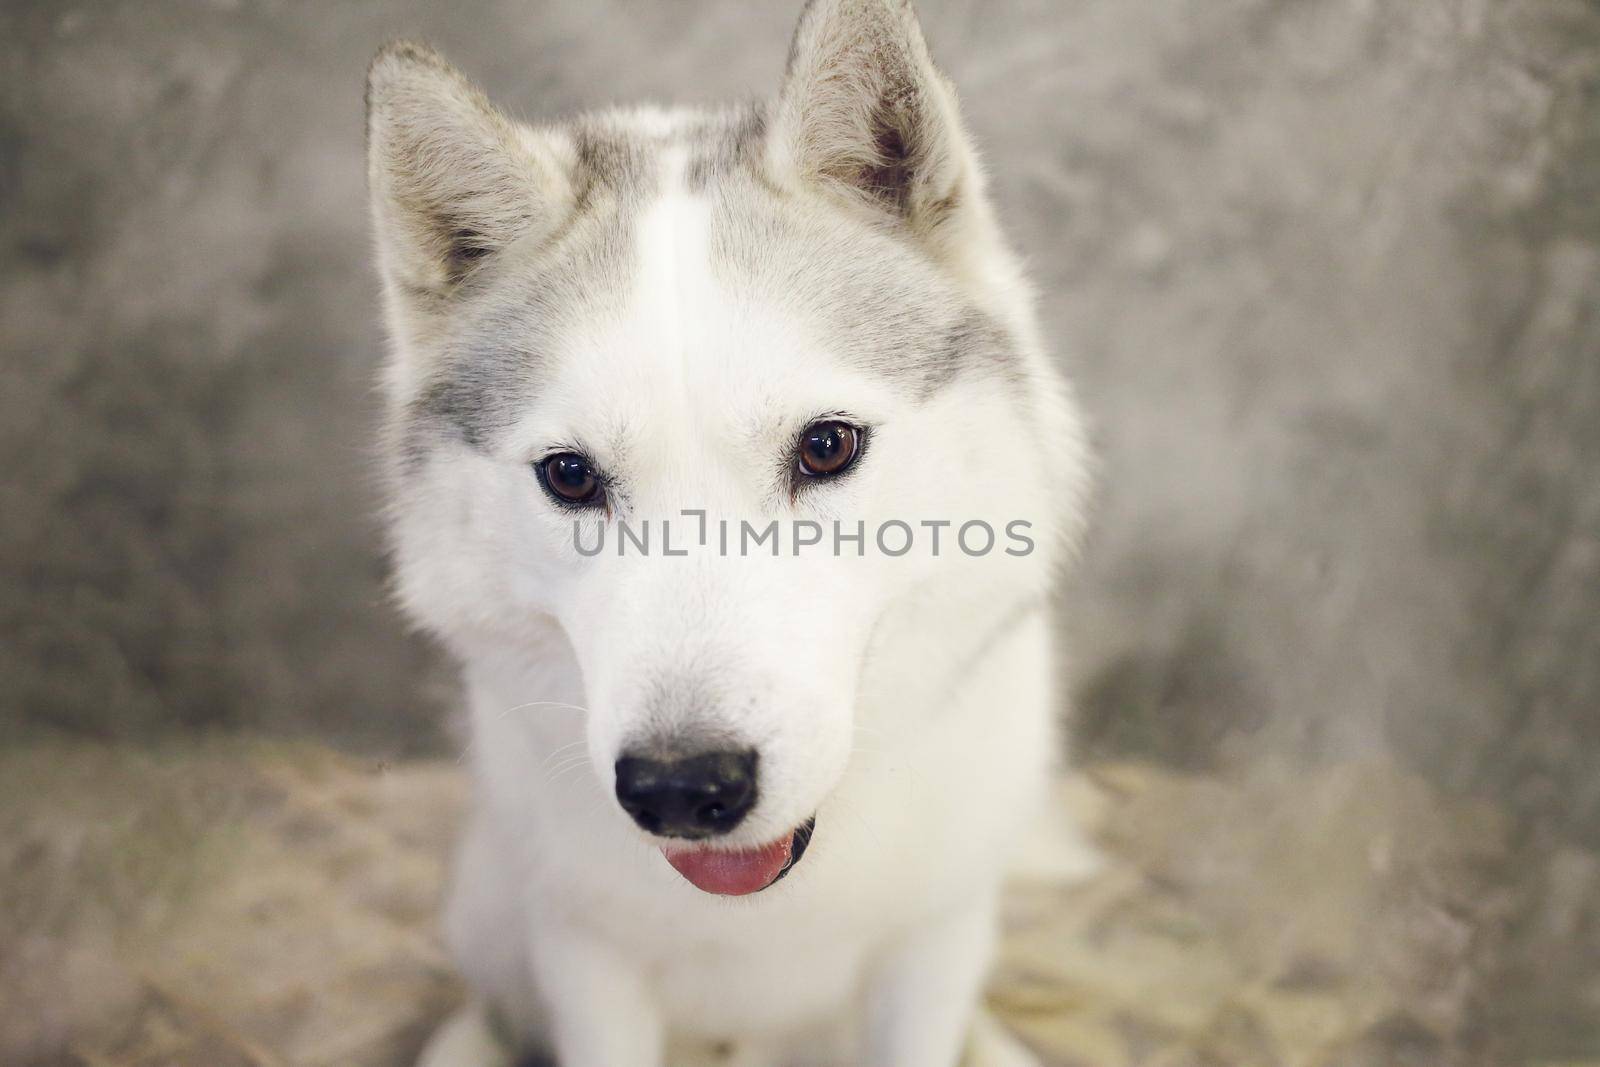 The muzzle of a dog Siberian Husky gray and white by selinsmo